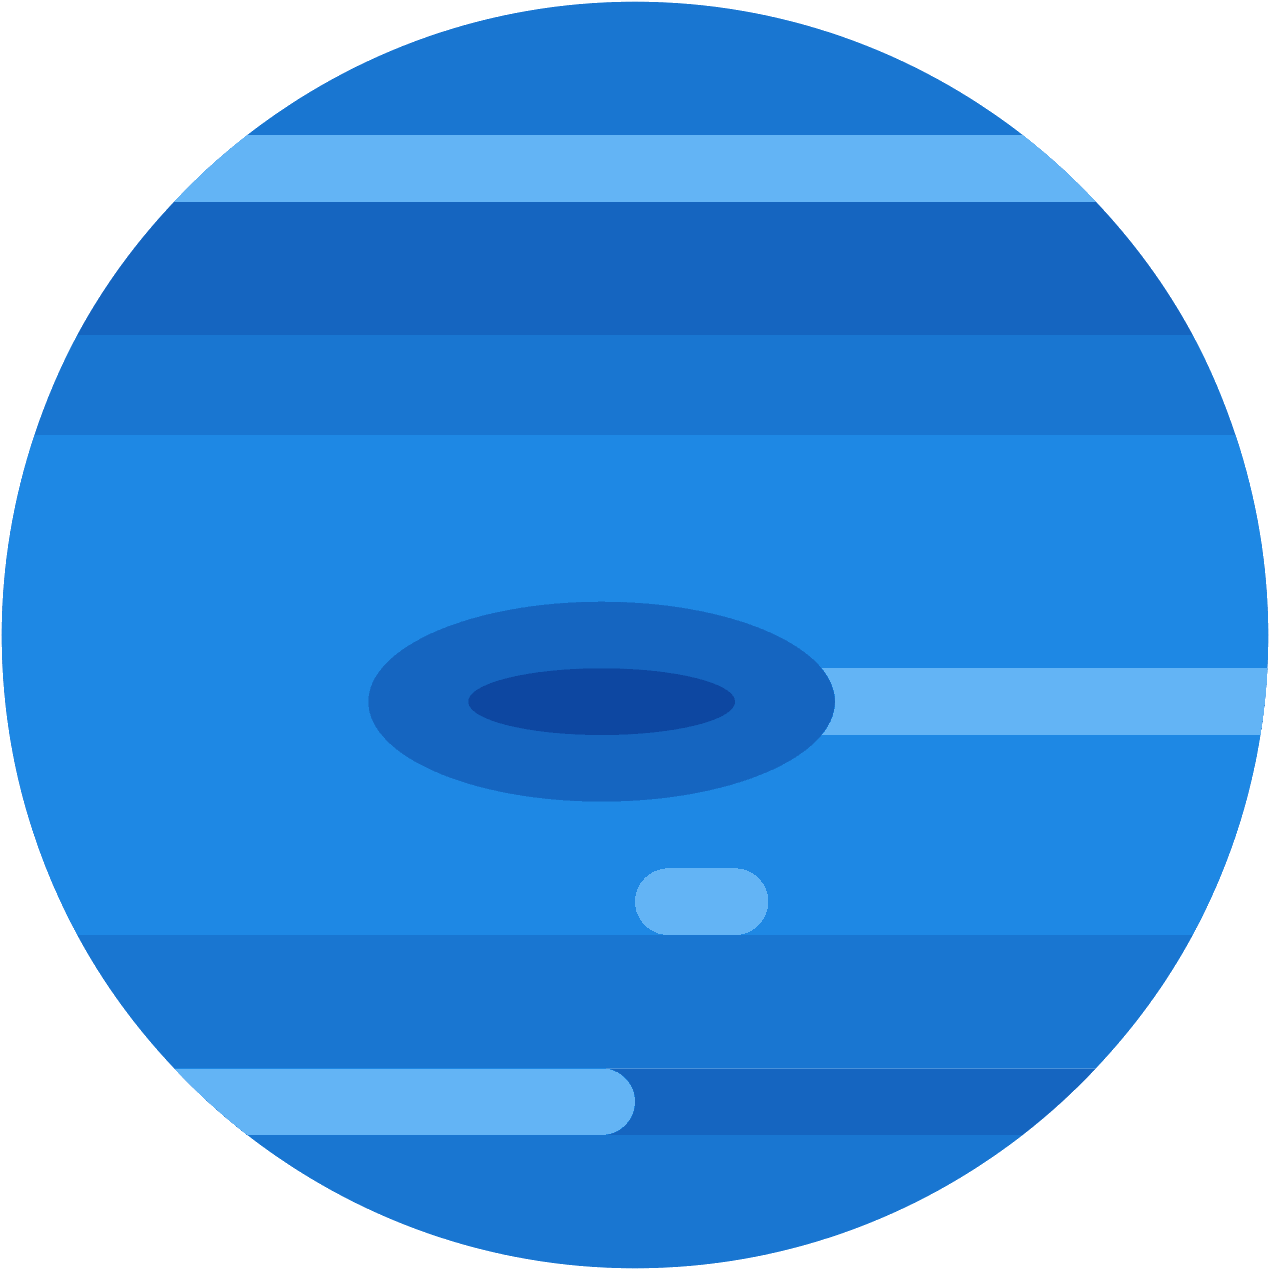 Neptune Planet Icon - Neptune Planet Png (1600x1600)